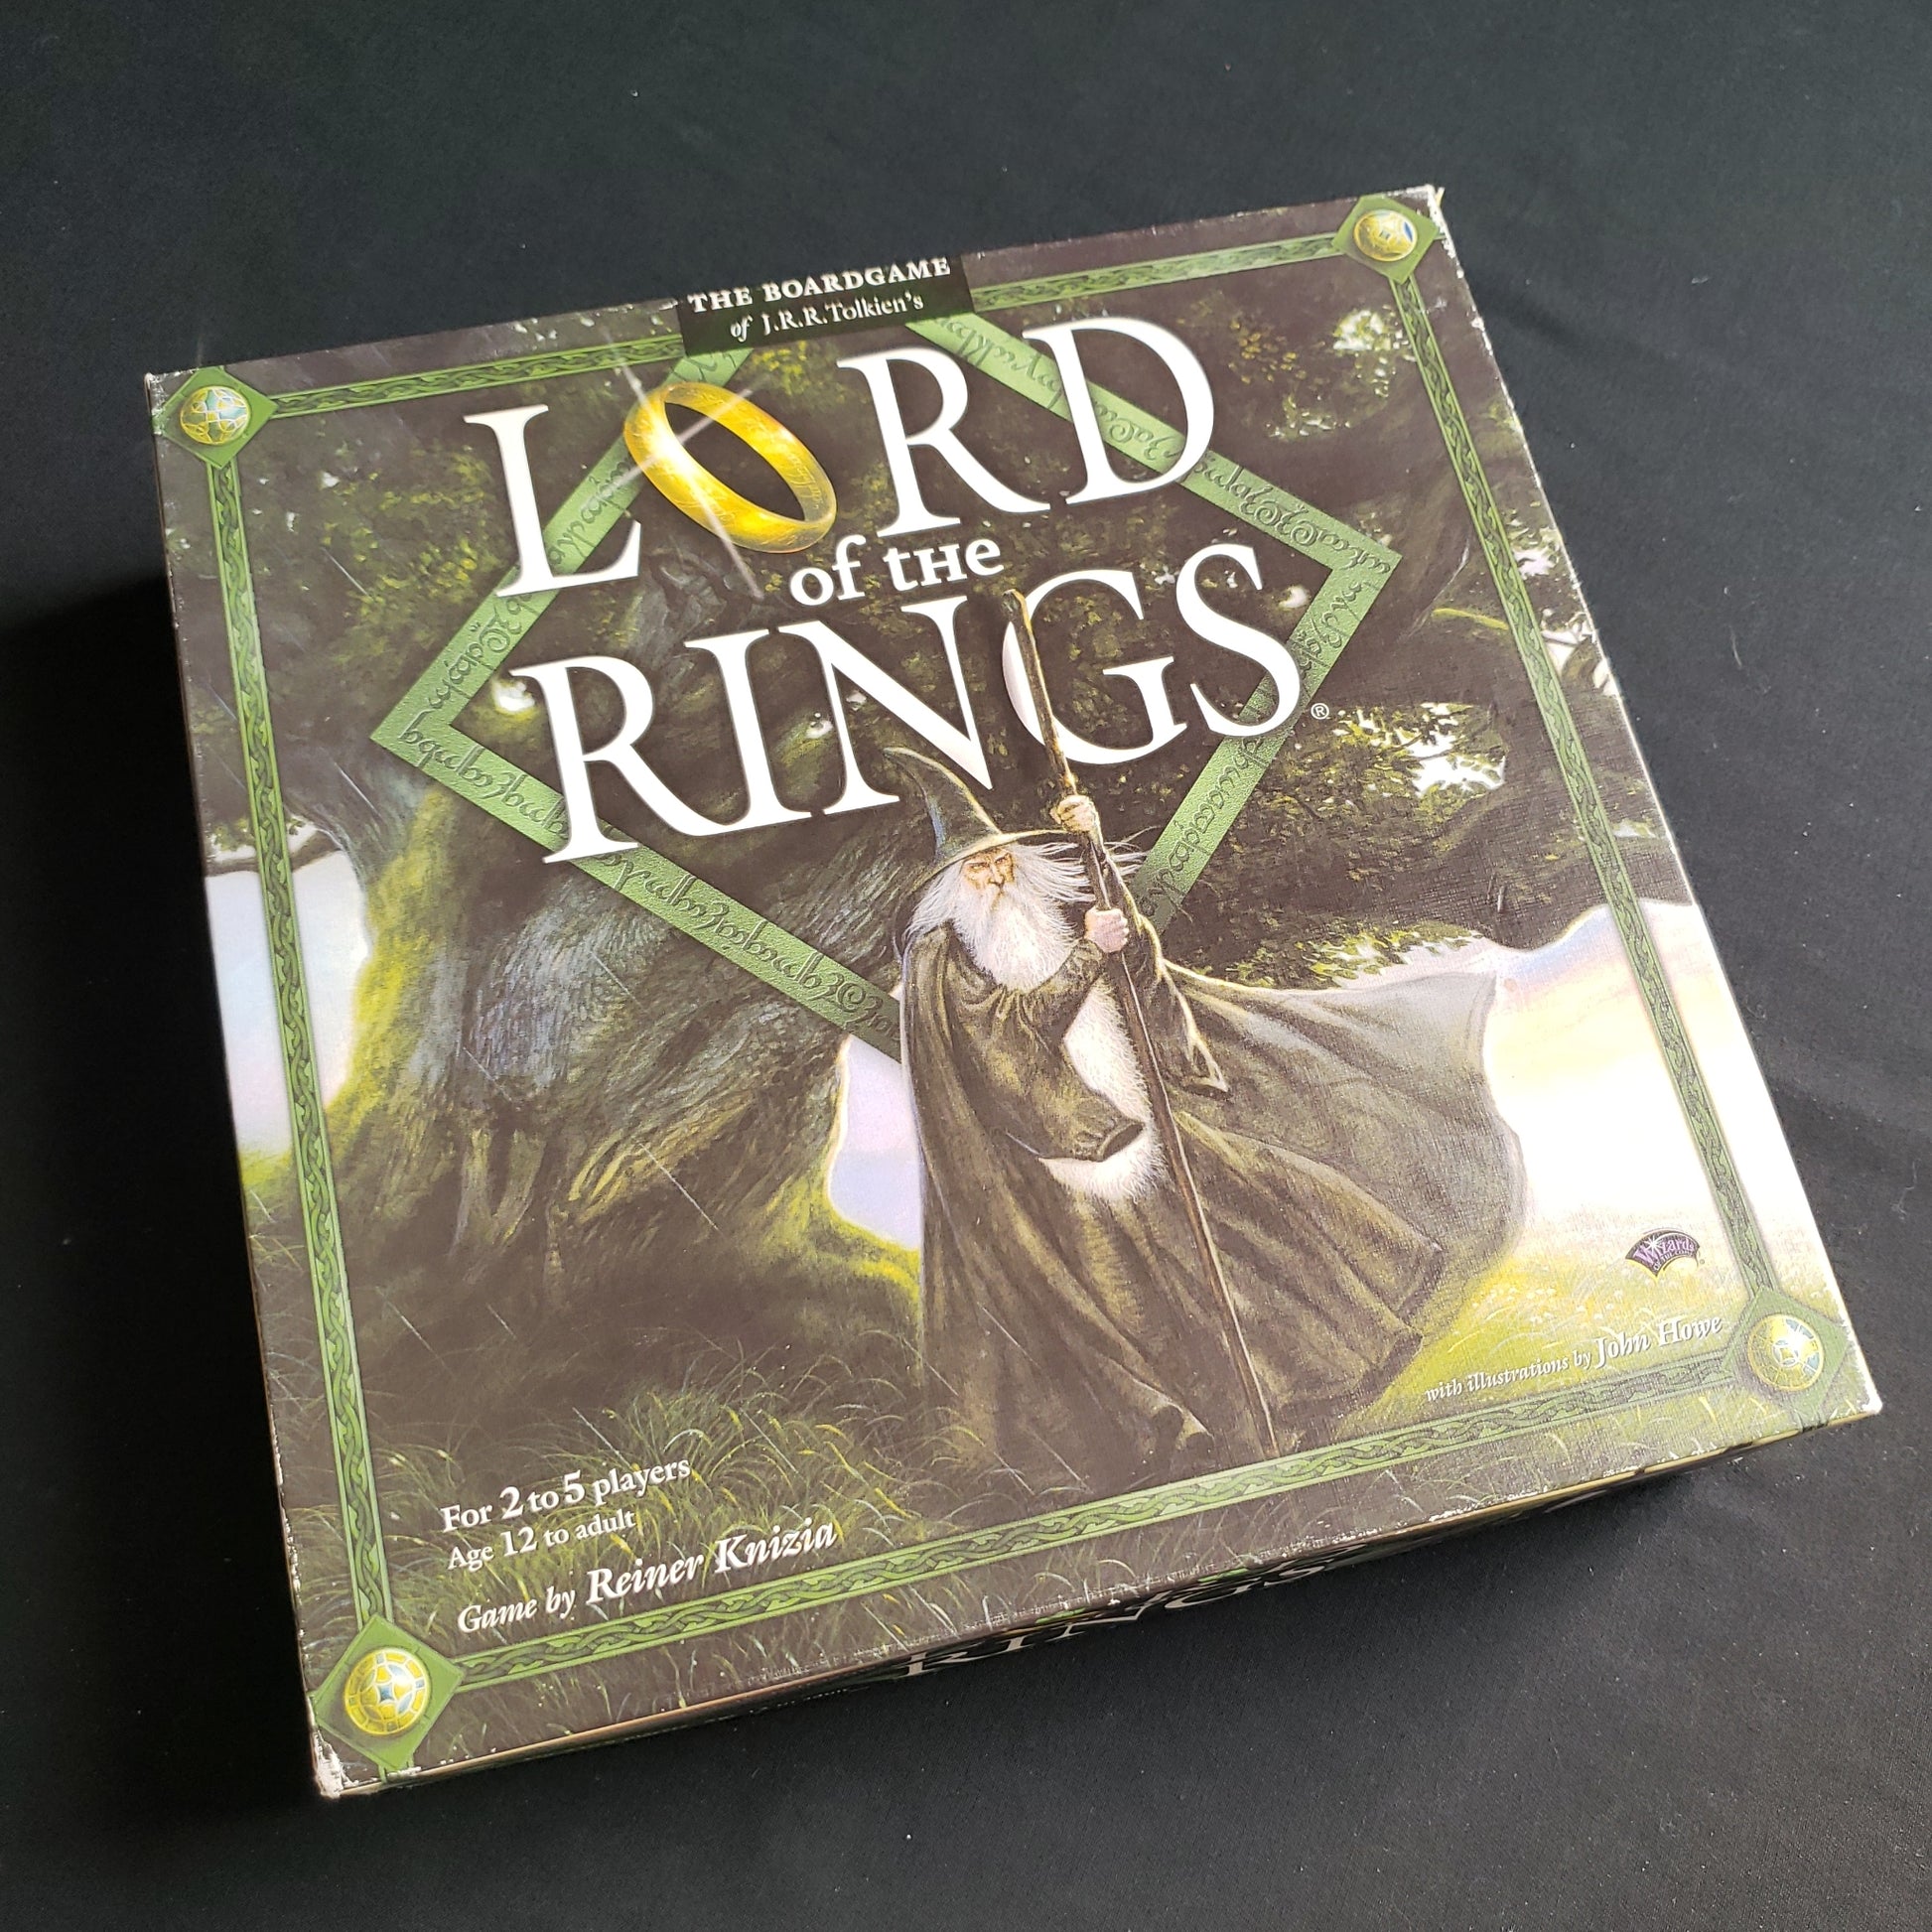 Image shows the front cover of the box of the Lord of the Rings board game